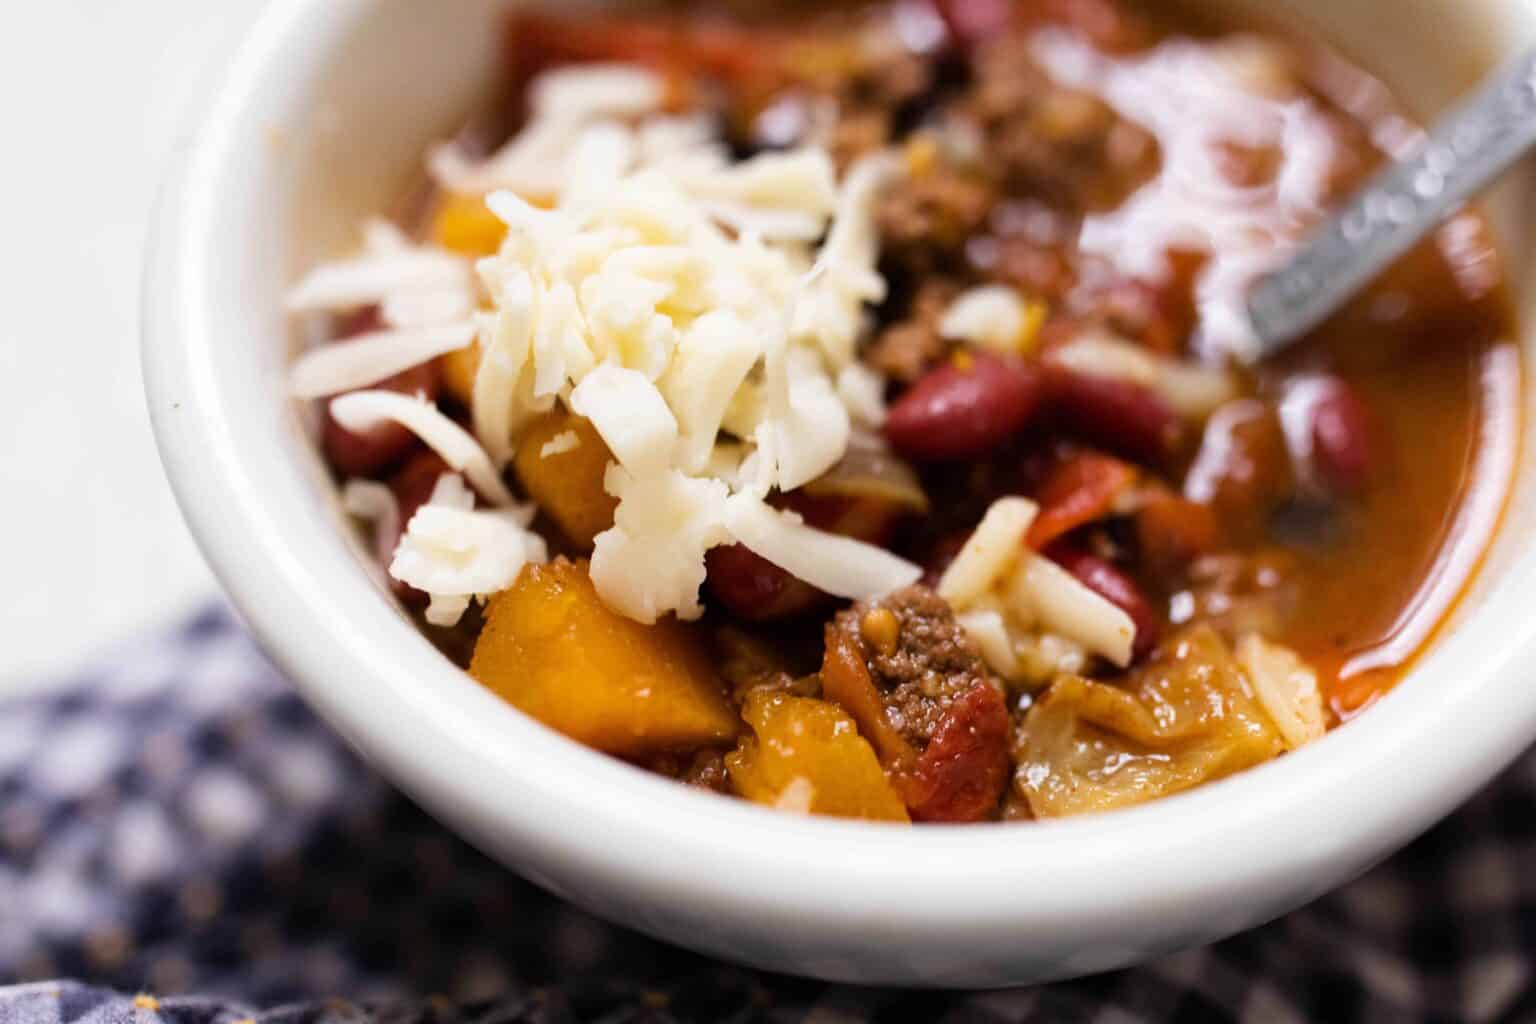 Pumpkin Chili Recipe With Ground Beef - Farmhouse on Boone